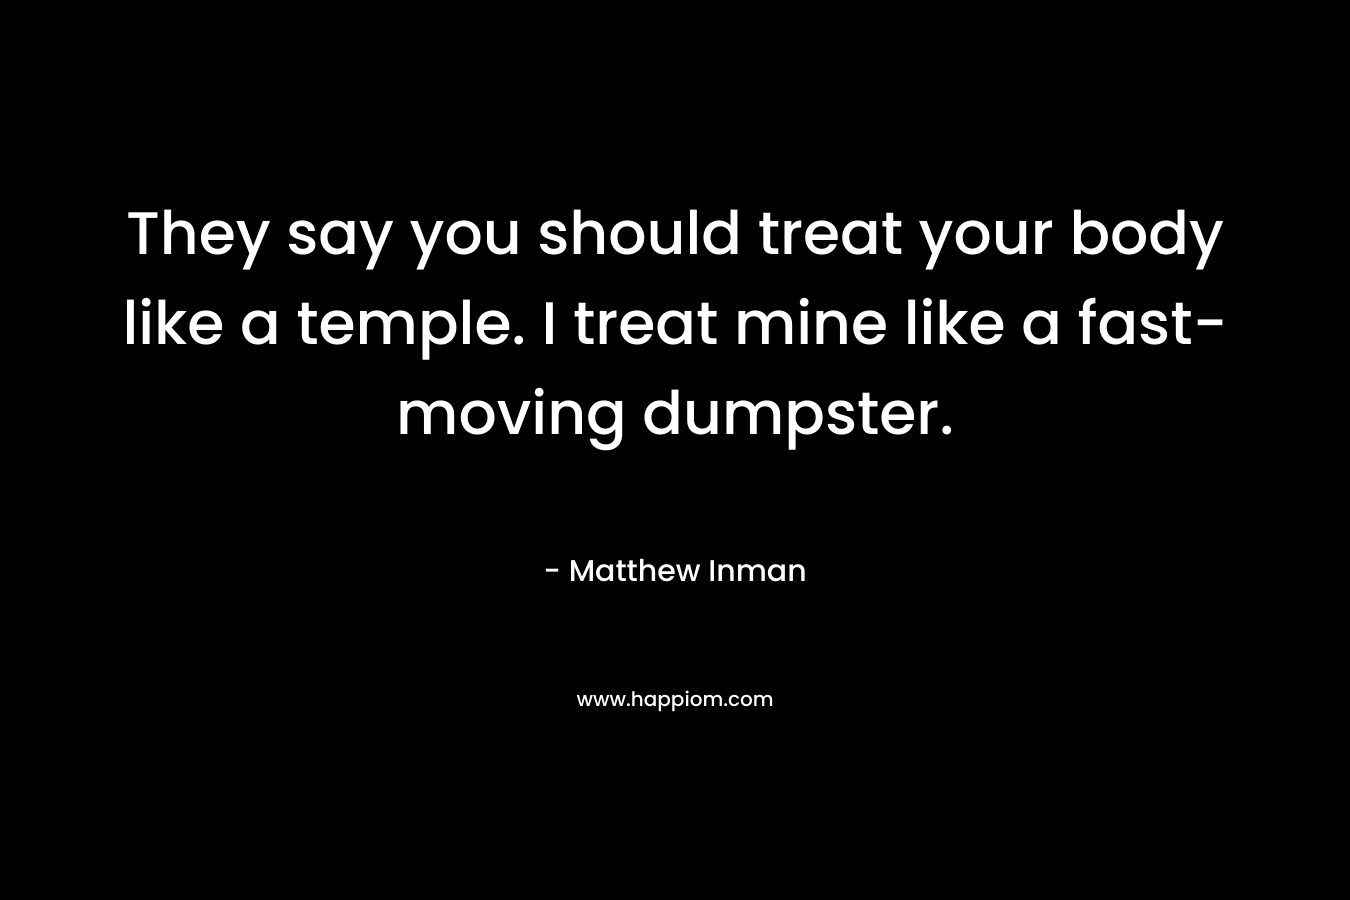 They say you should treat your body like a temple. I treat mine like a fast-moving dumpster. – Matthew Inman